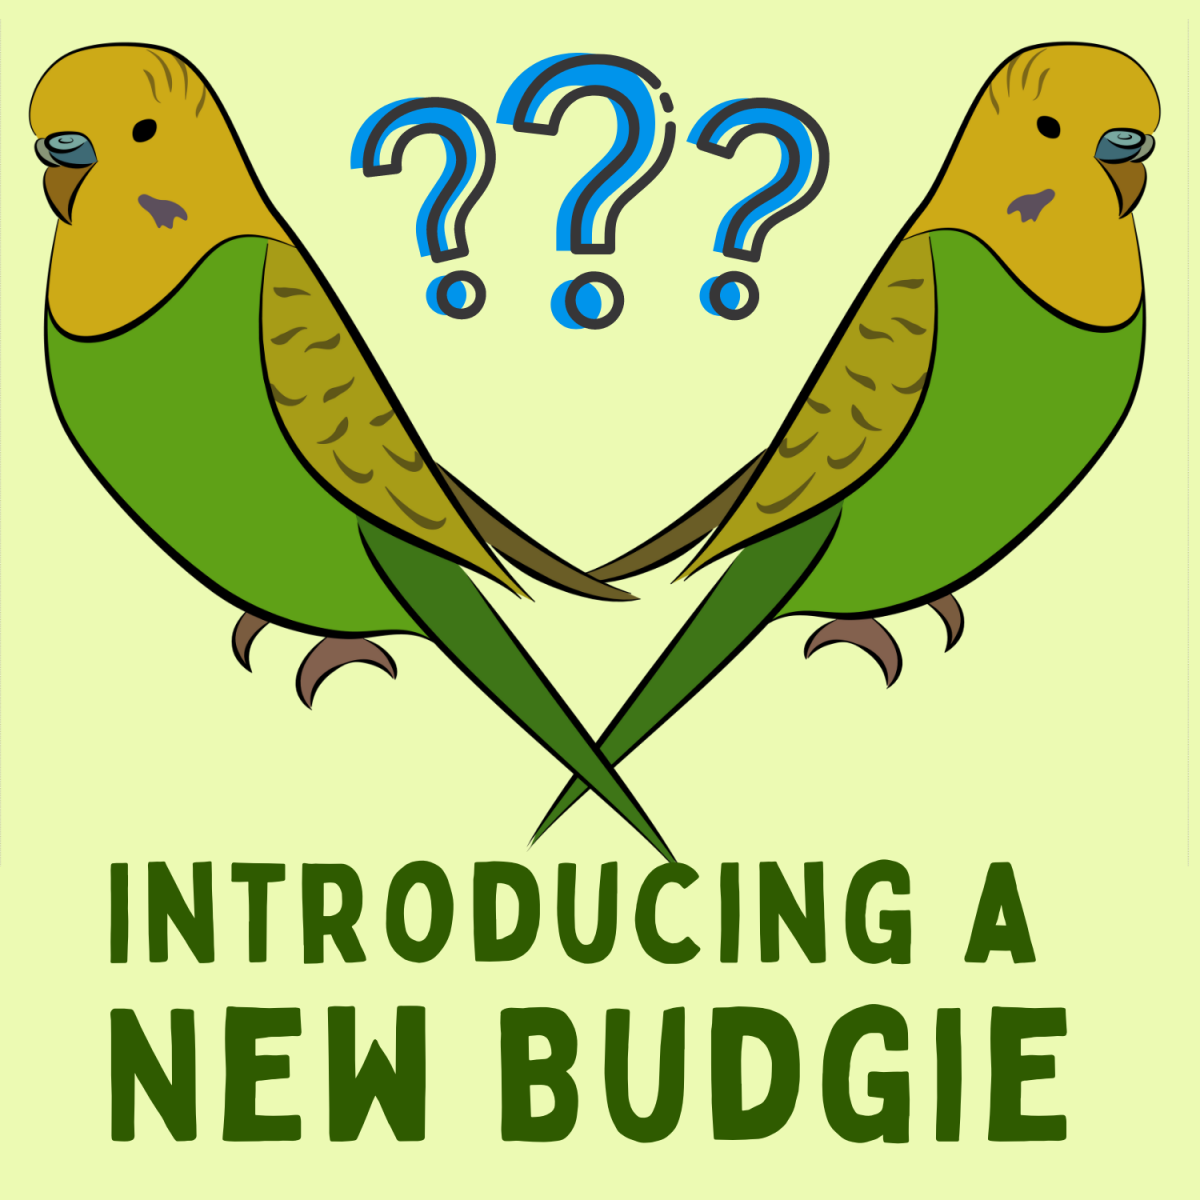 So you want to learn how to introduce budgies . . .